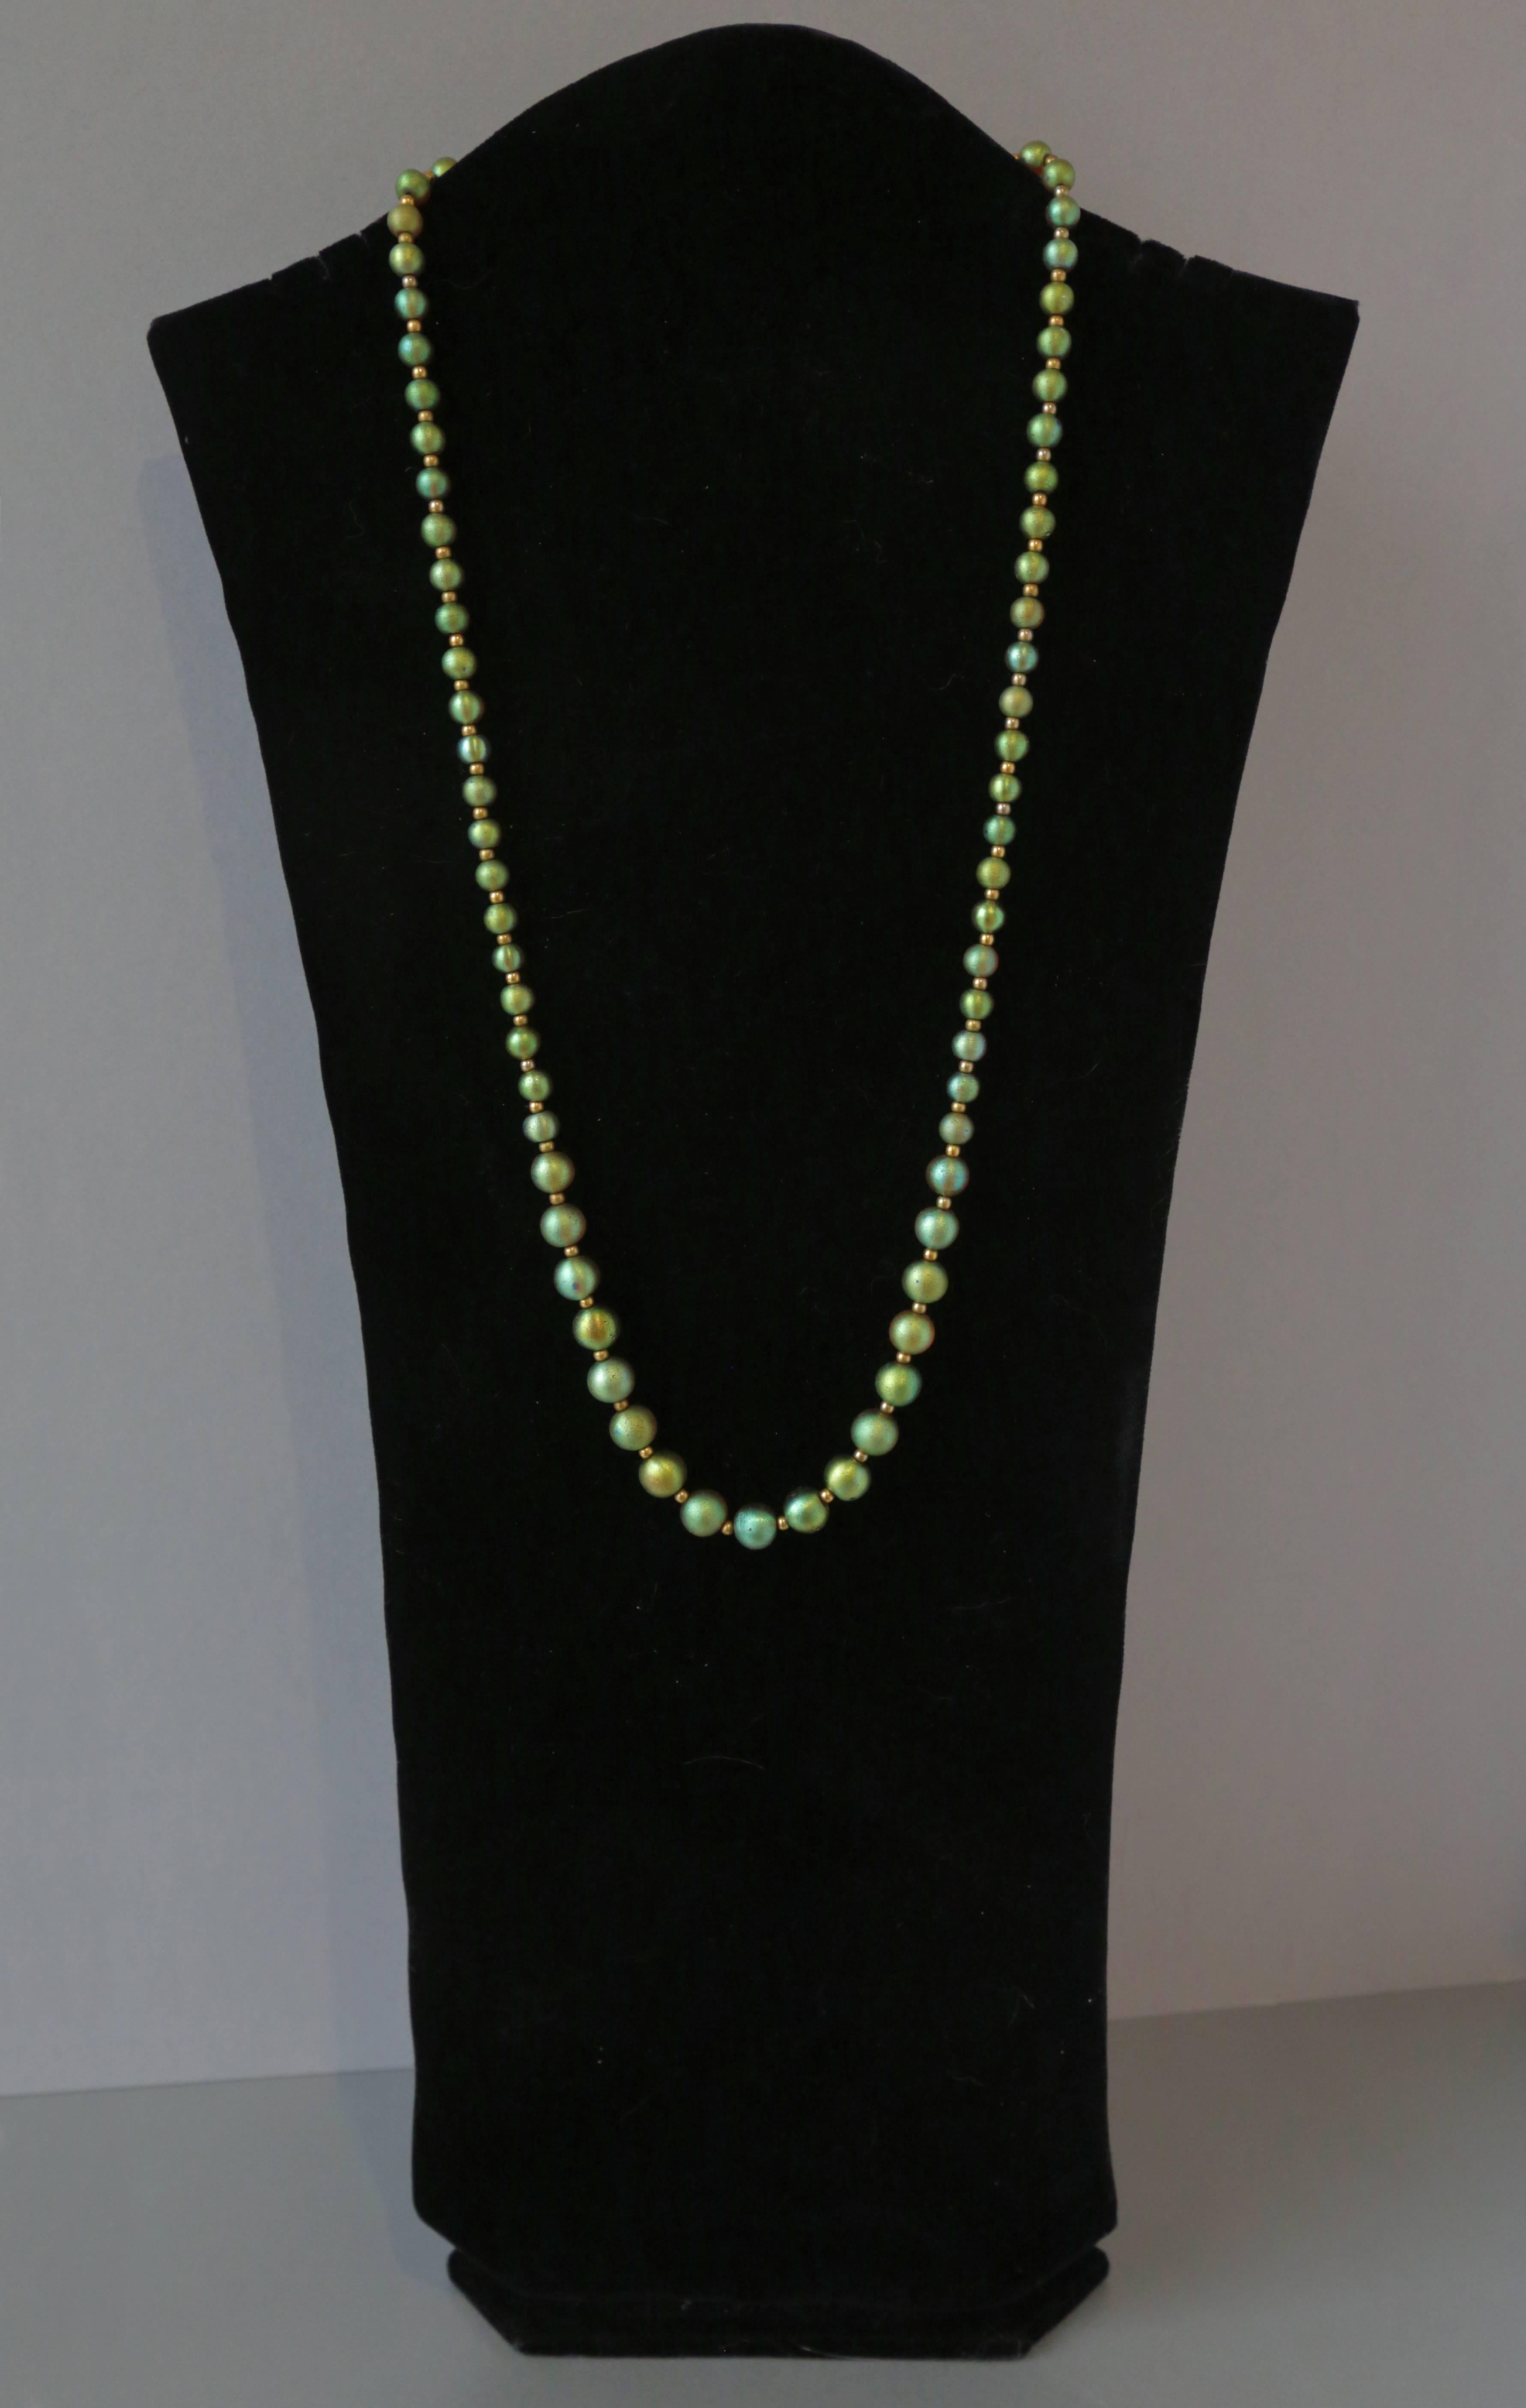 glass bead necklaces